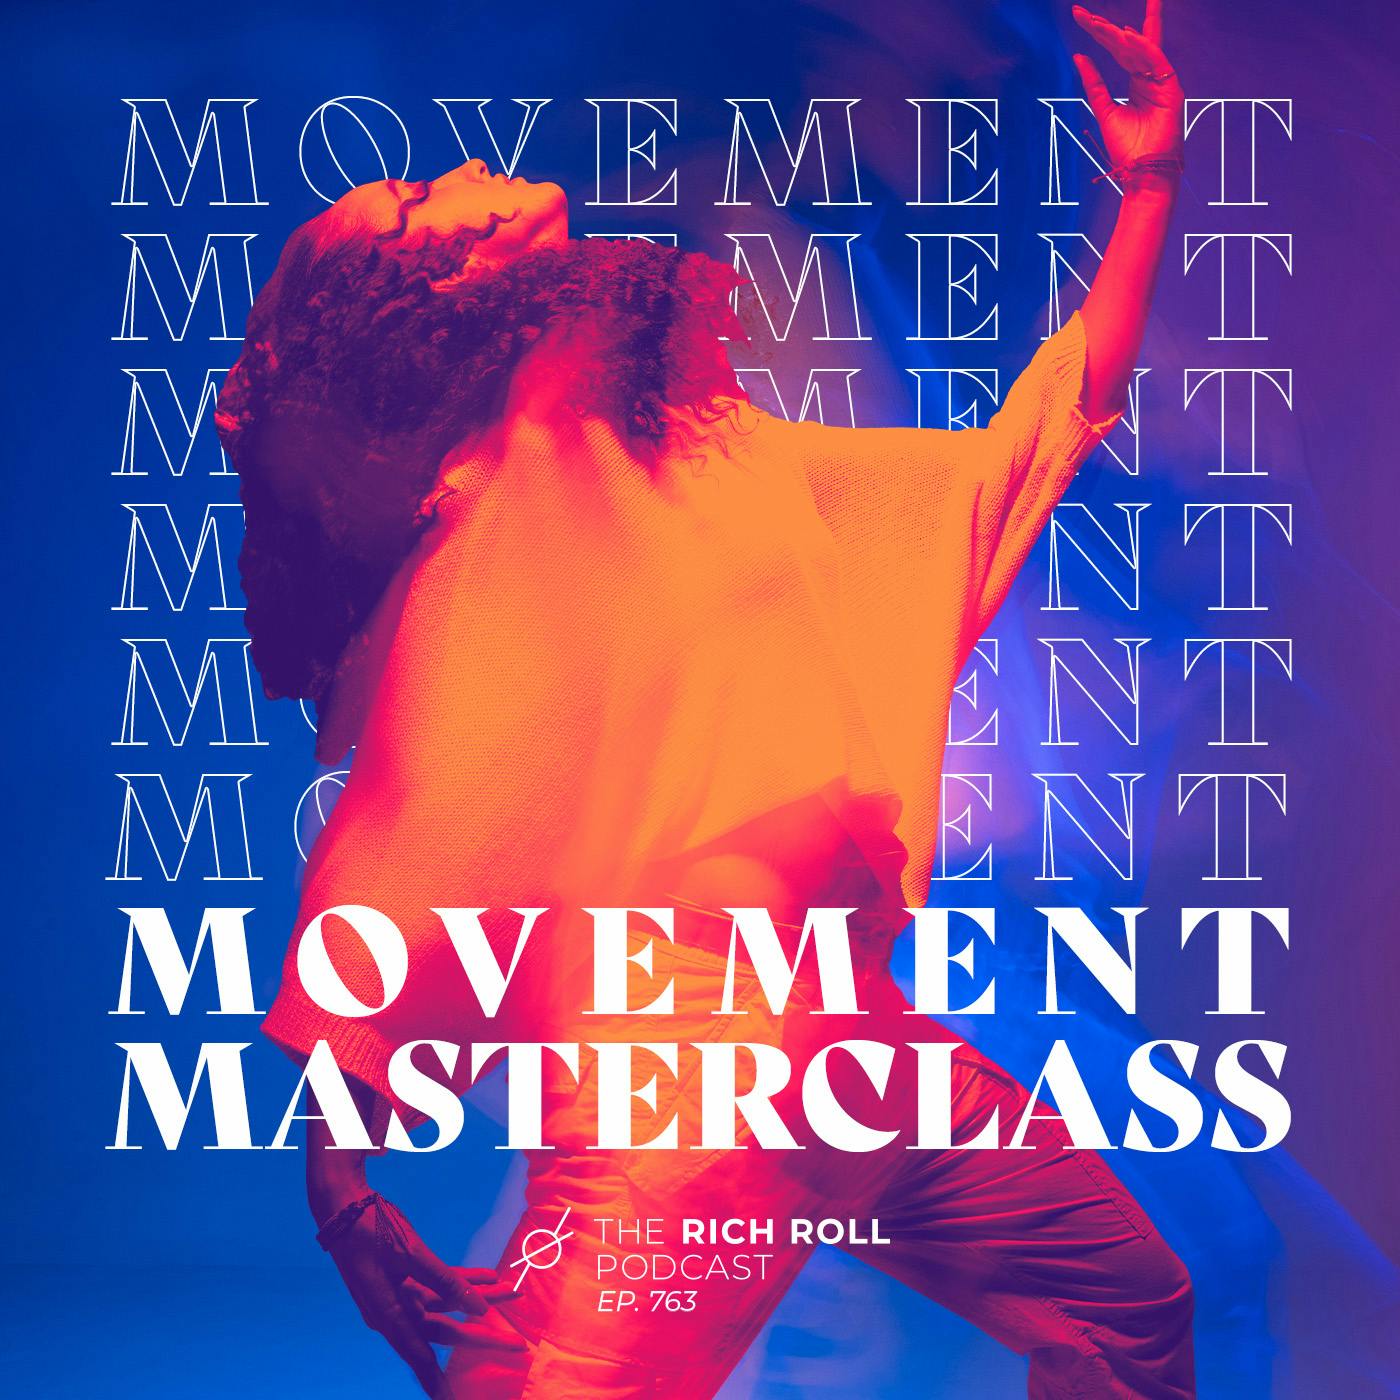 A Masterclass On Movement & Mobility